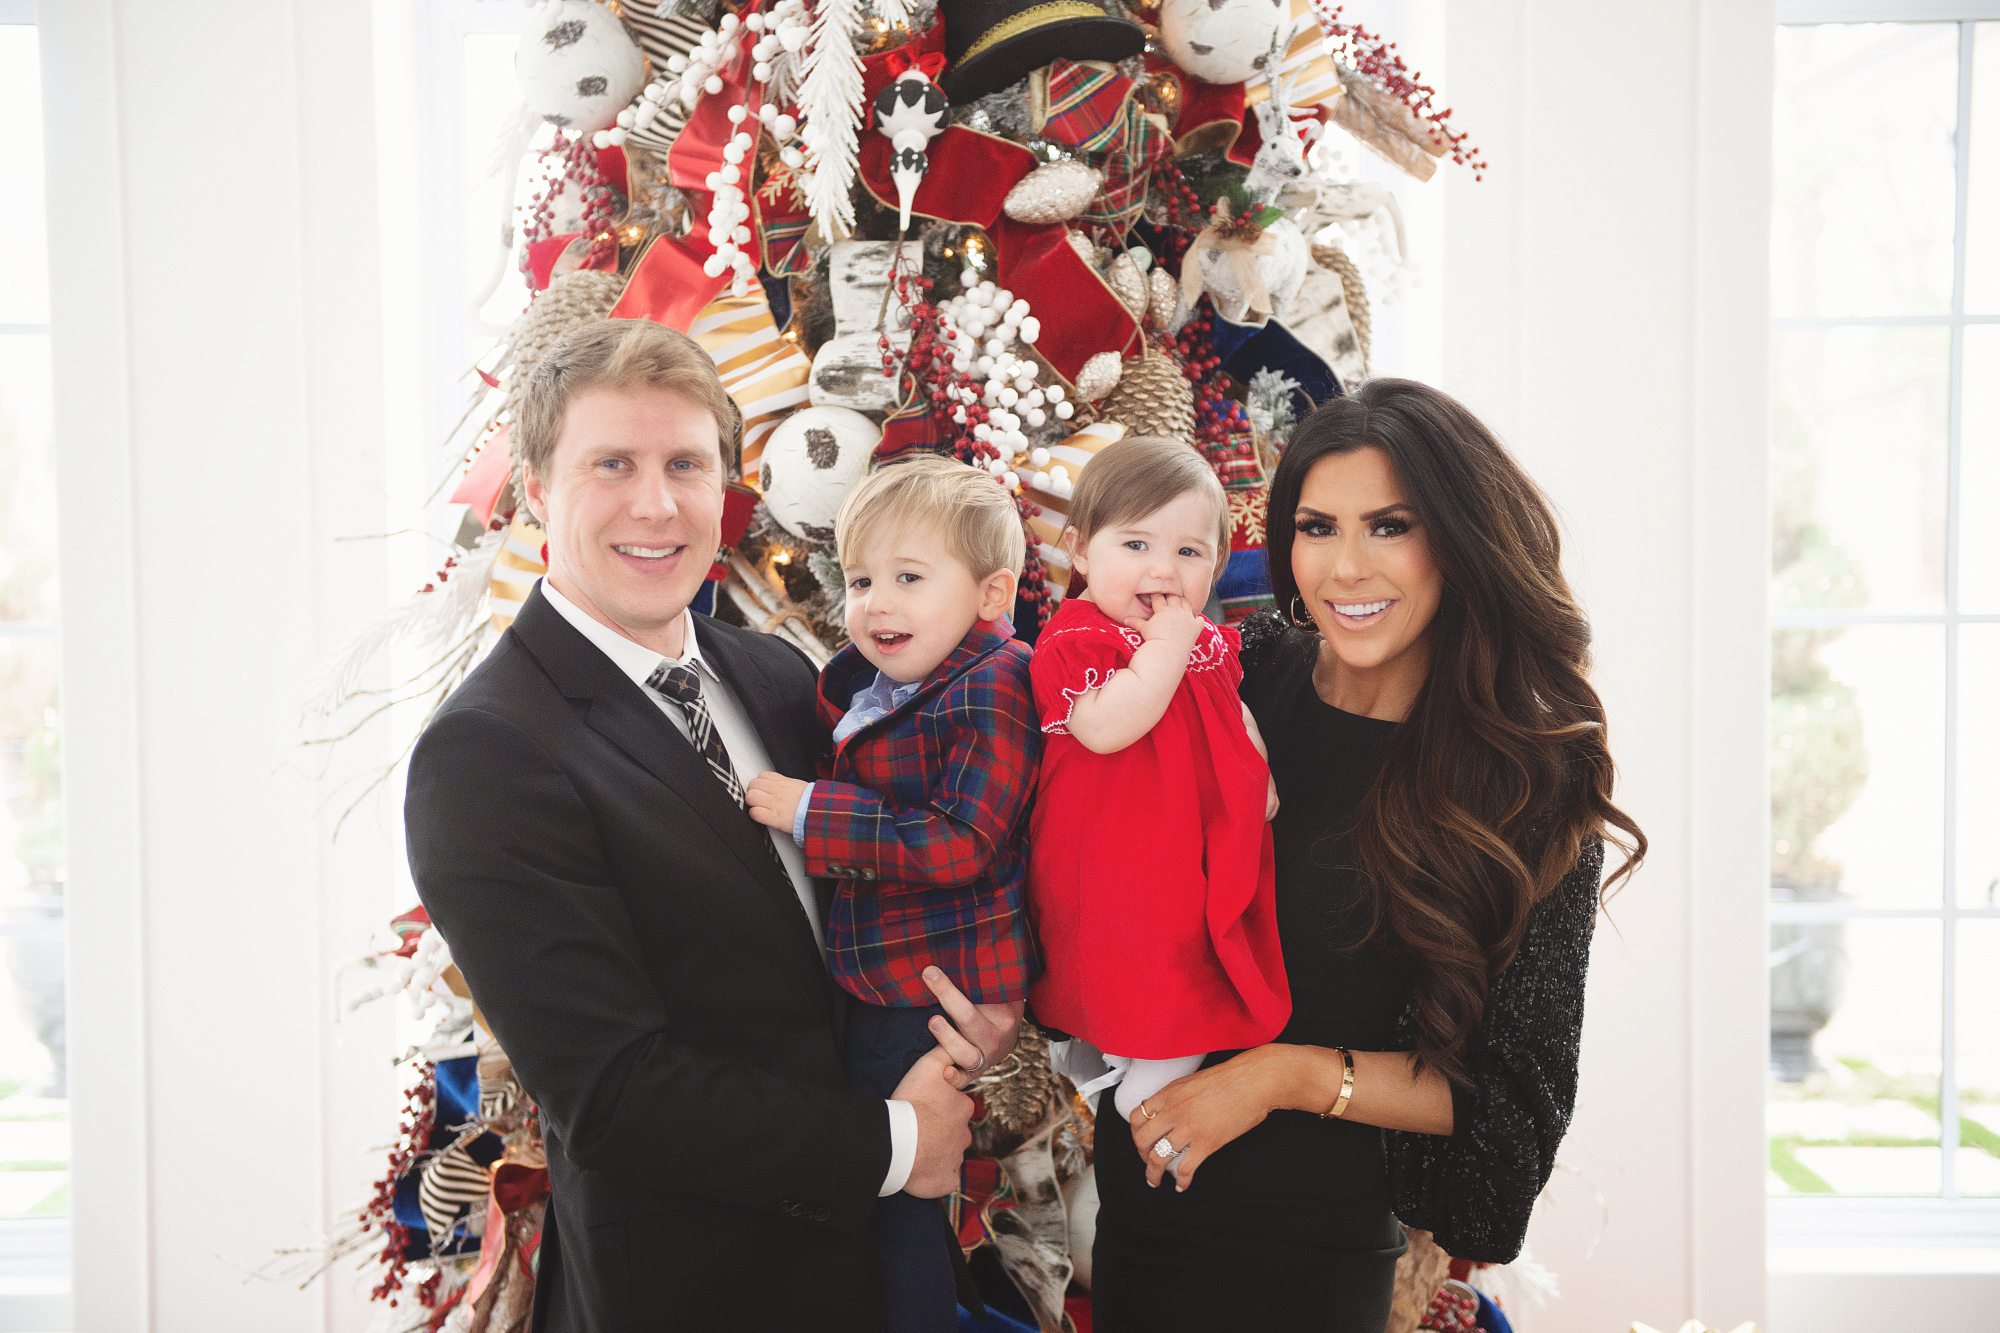 family Christmas card outfit inspiration, smocked Christmas dress baby, baby boy fashion Christmas, pinterest Christmas tree decor, shop hello holidays, Emily Gemma, the sweetest thing blog | Merry Christmas Wishes To You & Yours🎁❤️🎄 [Our Christmas Card 2019] by popular Oklahoma life and style blog, The Sweetest Thing: image a family standing in front of their Christmas tree and wearing Smocked Auctions MERRY CHRISTMAS SMOCKED BISHOP RED CORDUROY dress, Zara BASIC SERGED SKINNY JEANS, Zara  LEATHER LOAFERS, Janie and Jack POPLIN SHIRT, Janie and Jack PLAID WOOL BLAZER, Nordstrom Burberry men's tie, Nordstrom Boss Huge/Genius Trim Fit Solid Wool Suit, CHRISTIAN LOUBOUTIN So Kate 120 suede pumps, and Nordstrom Eliza J Long Sequin Sleeve Sheath Dress.